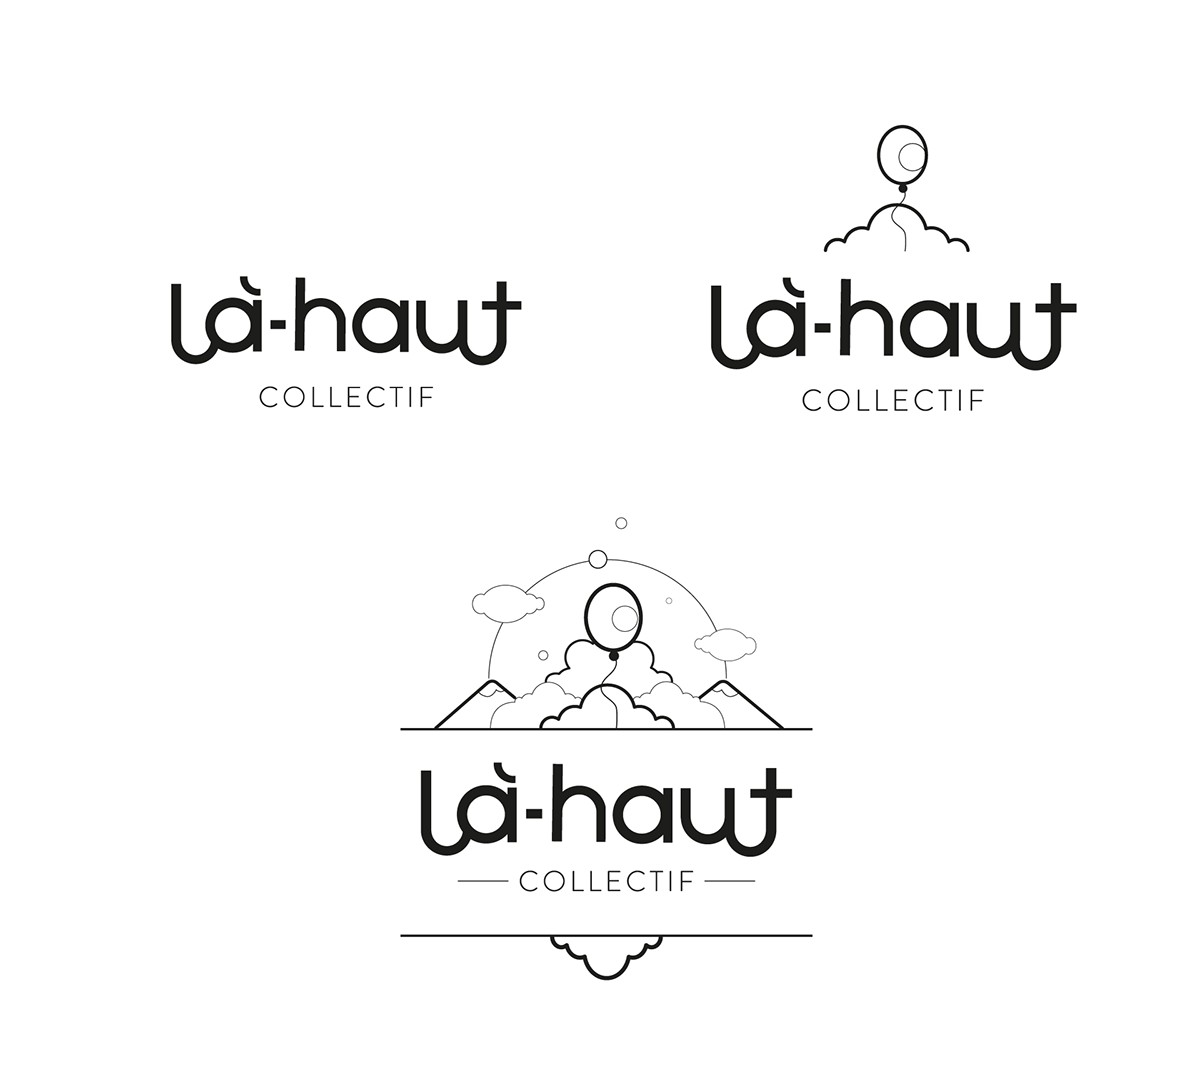 The logotype simplificated and complex